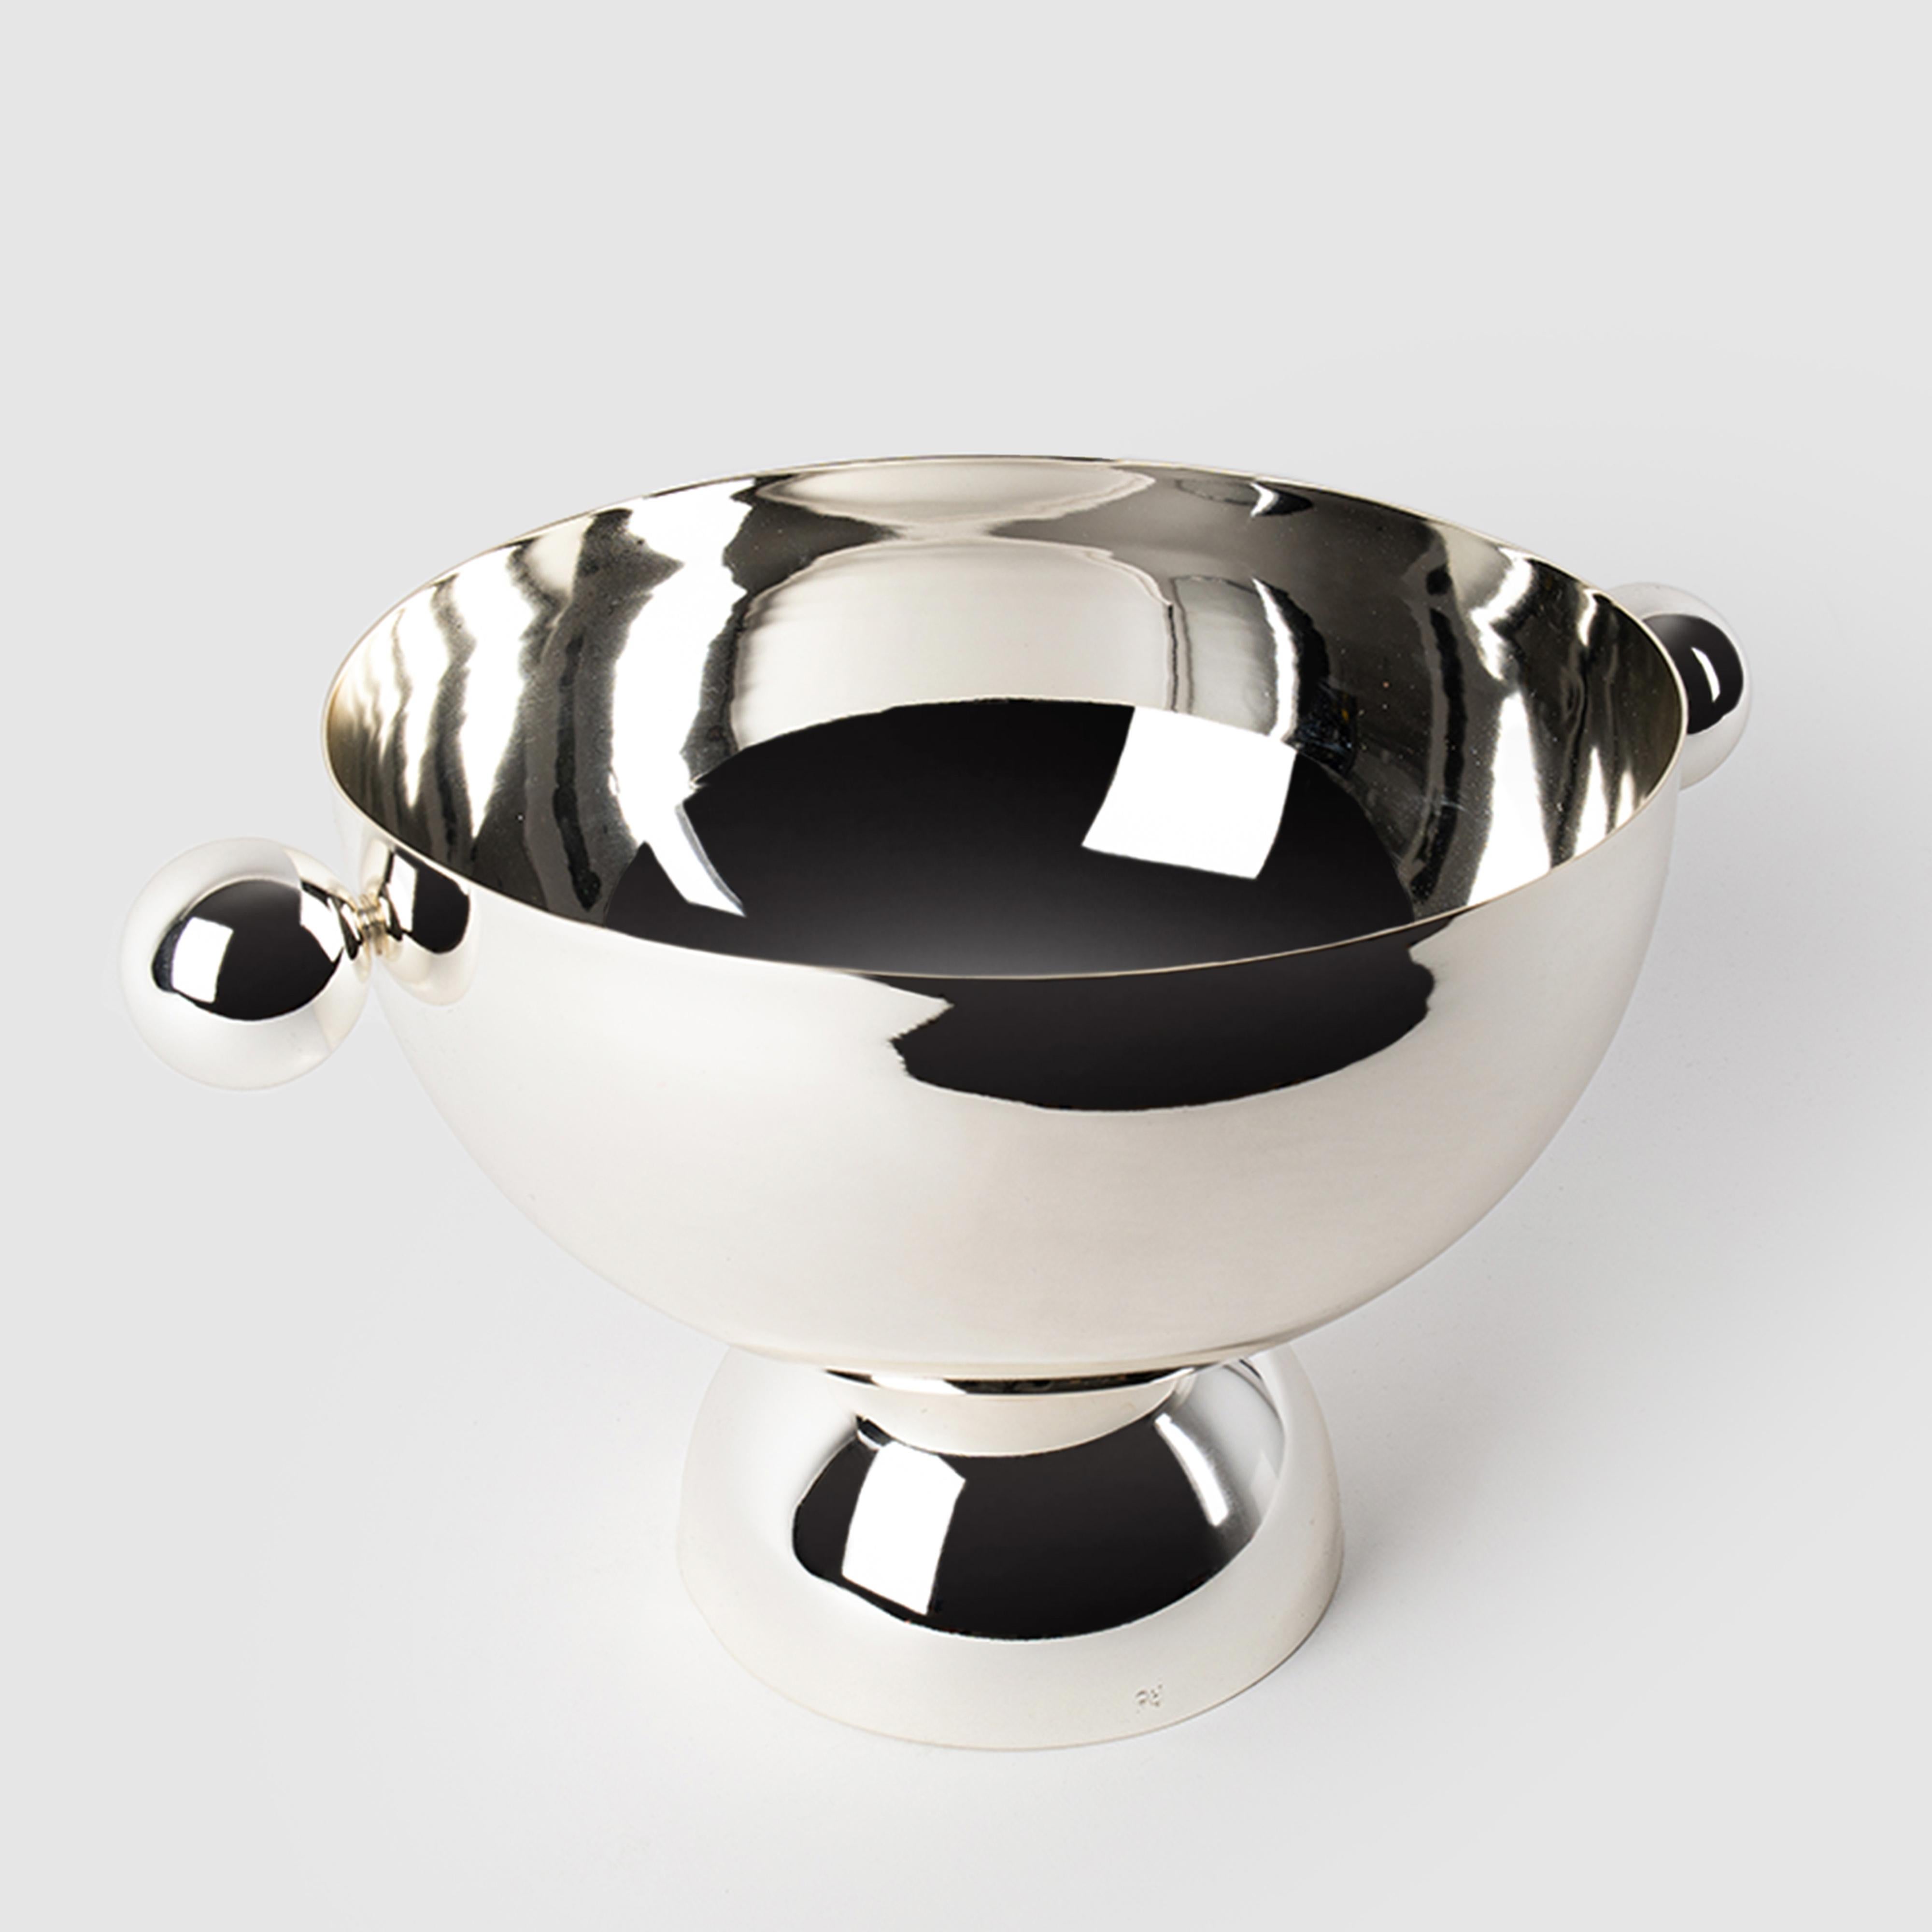 Turkish Contemporary Modern, Kubbe Champagne Bucket, Varnished Silver-Nickel Plated For Sale